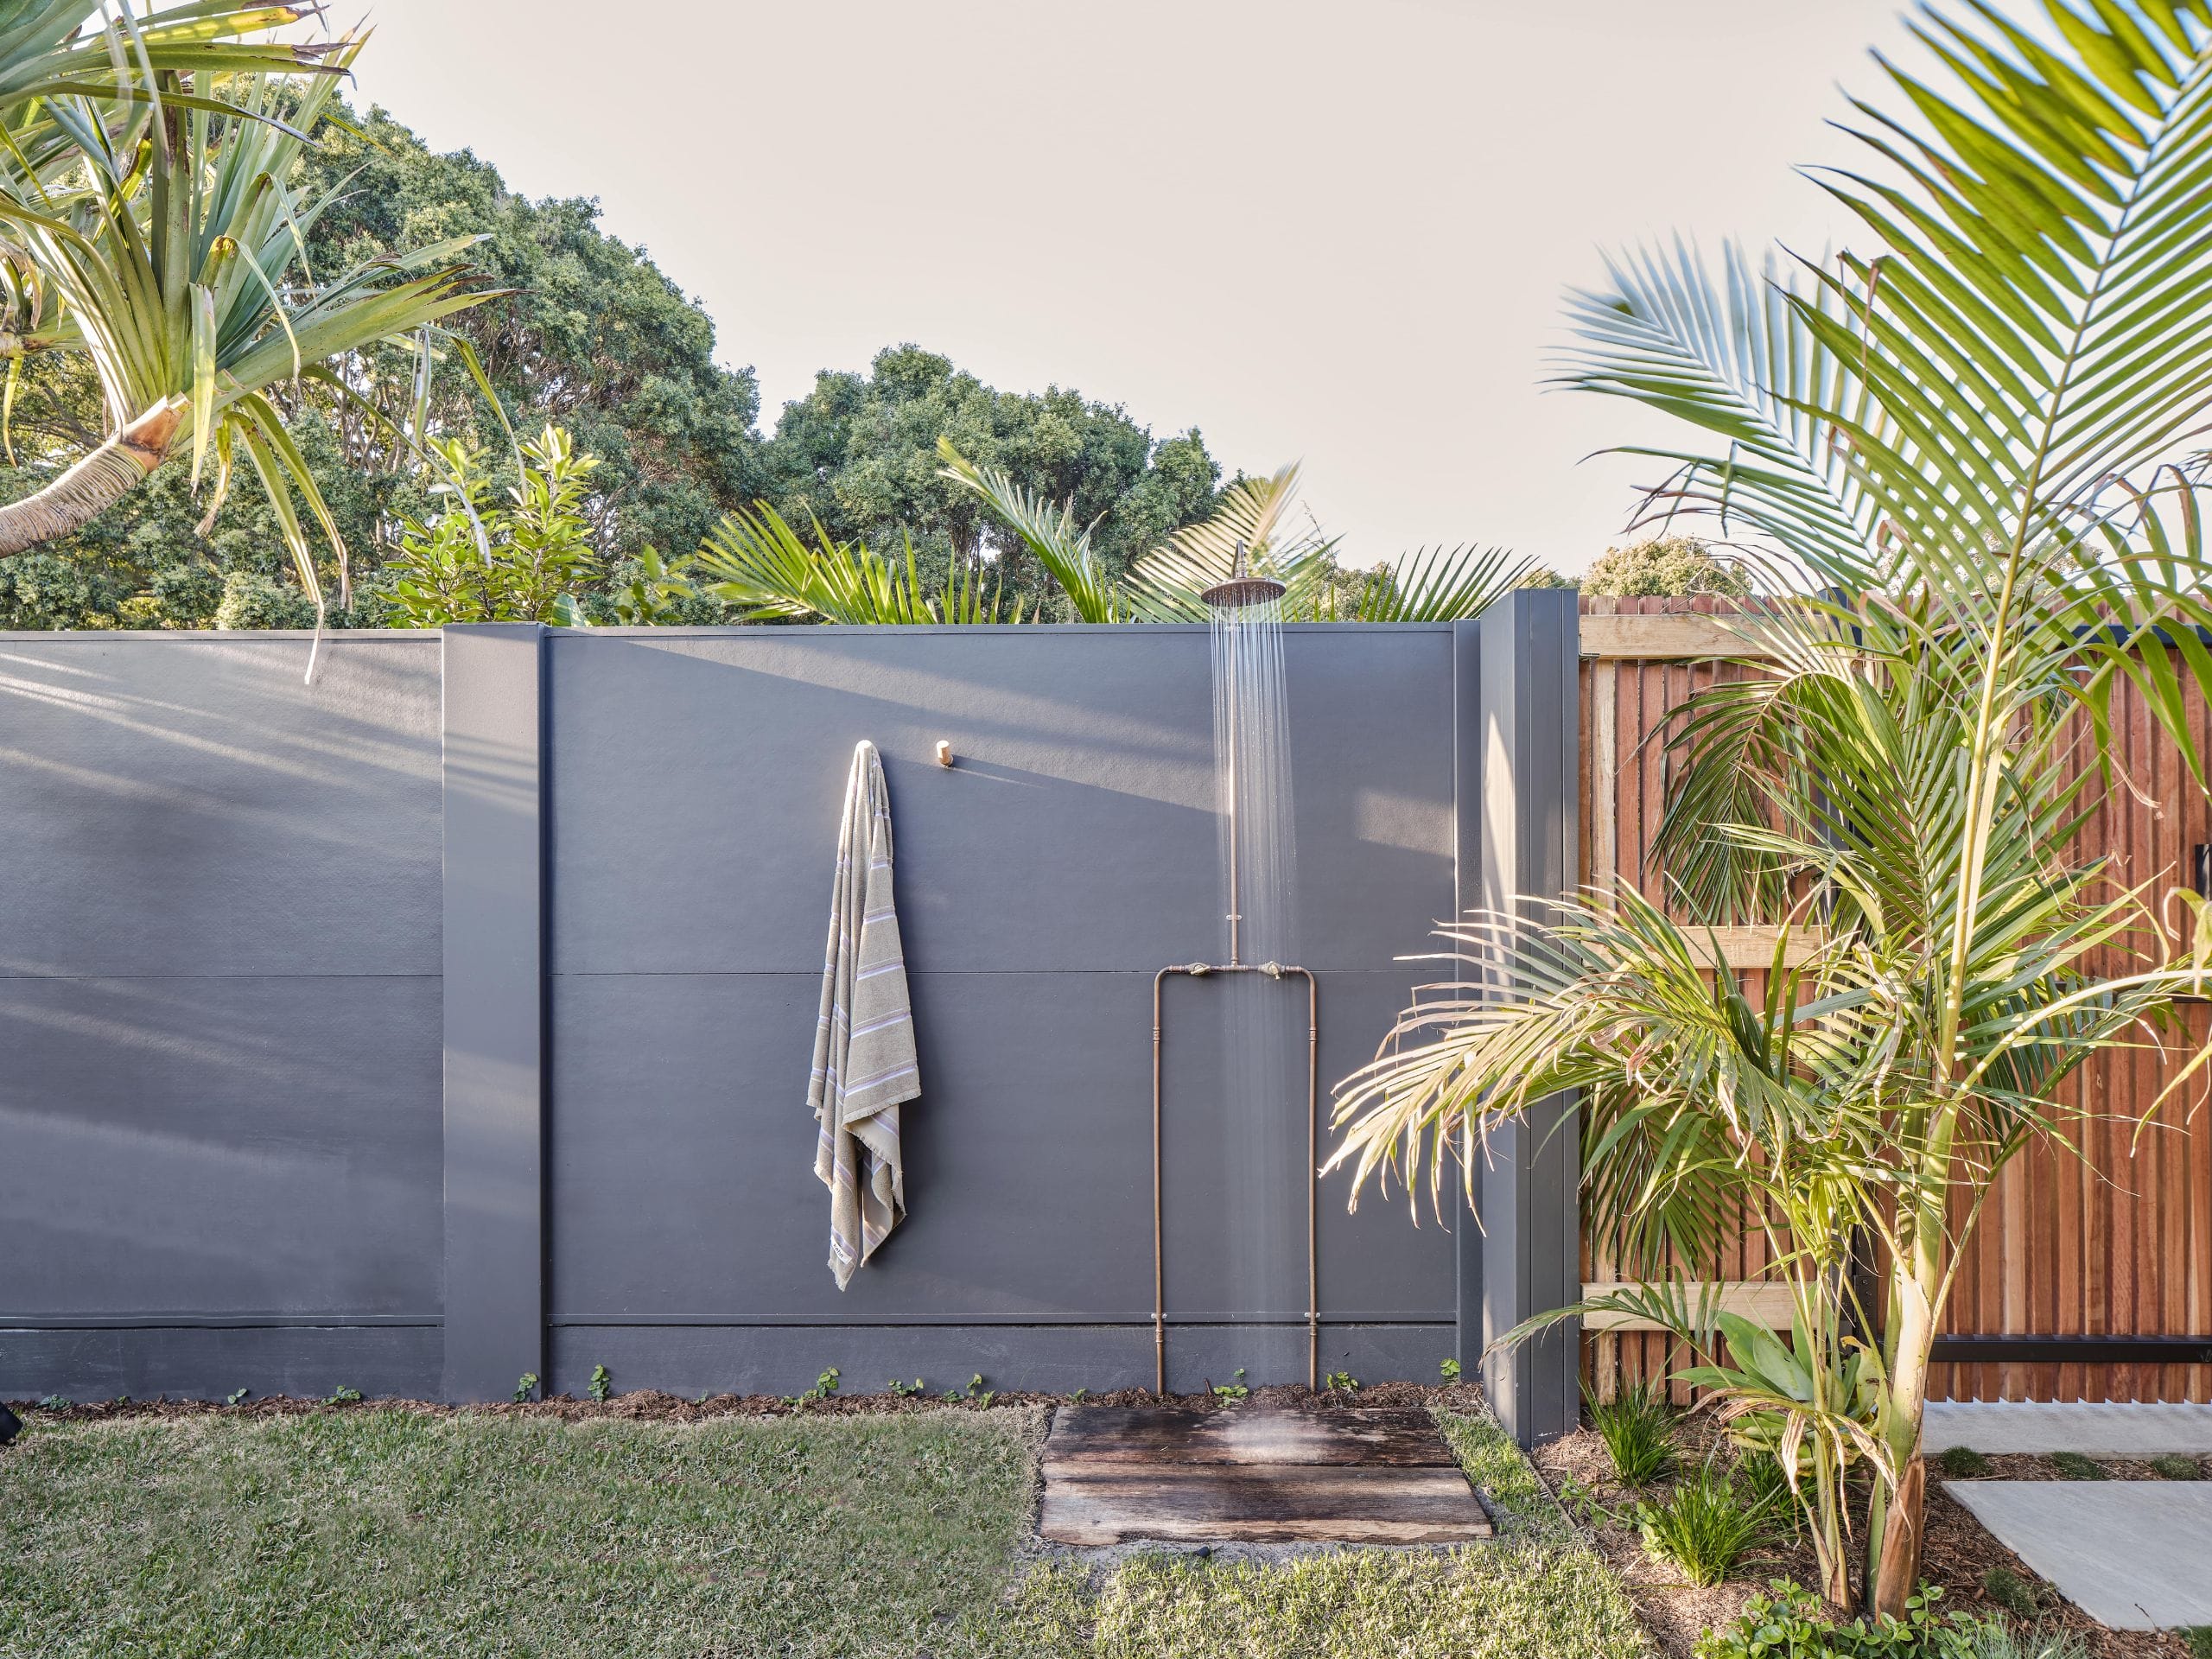 An outdoor shower provides functional style